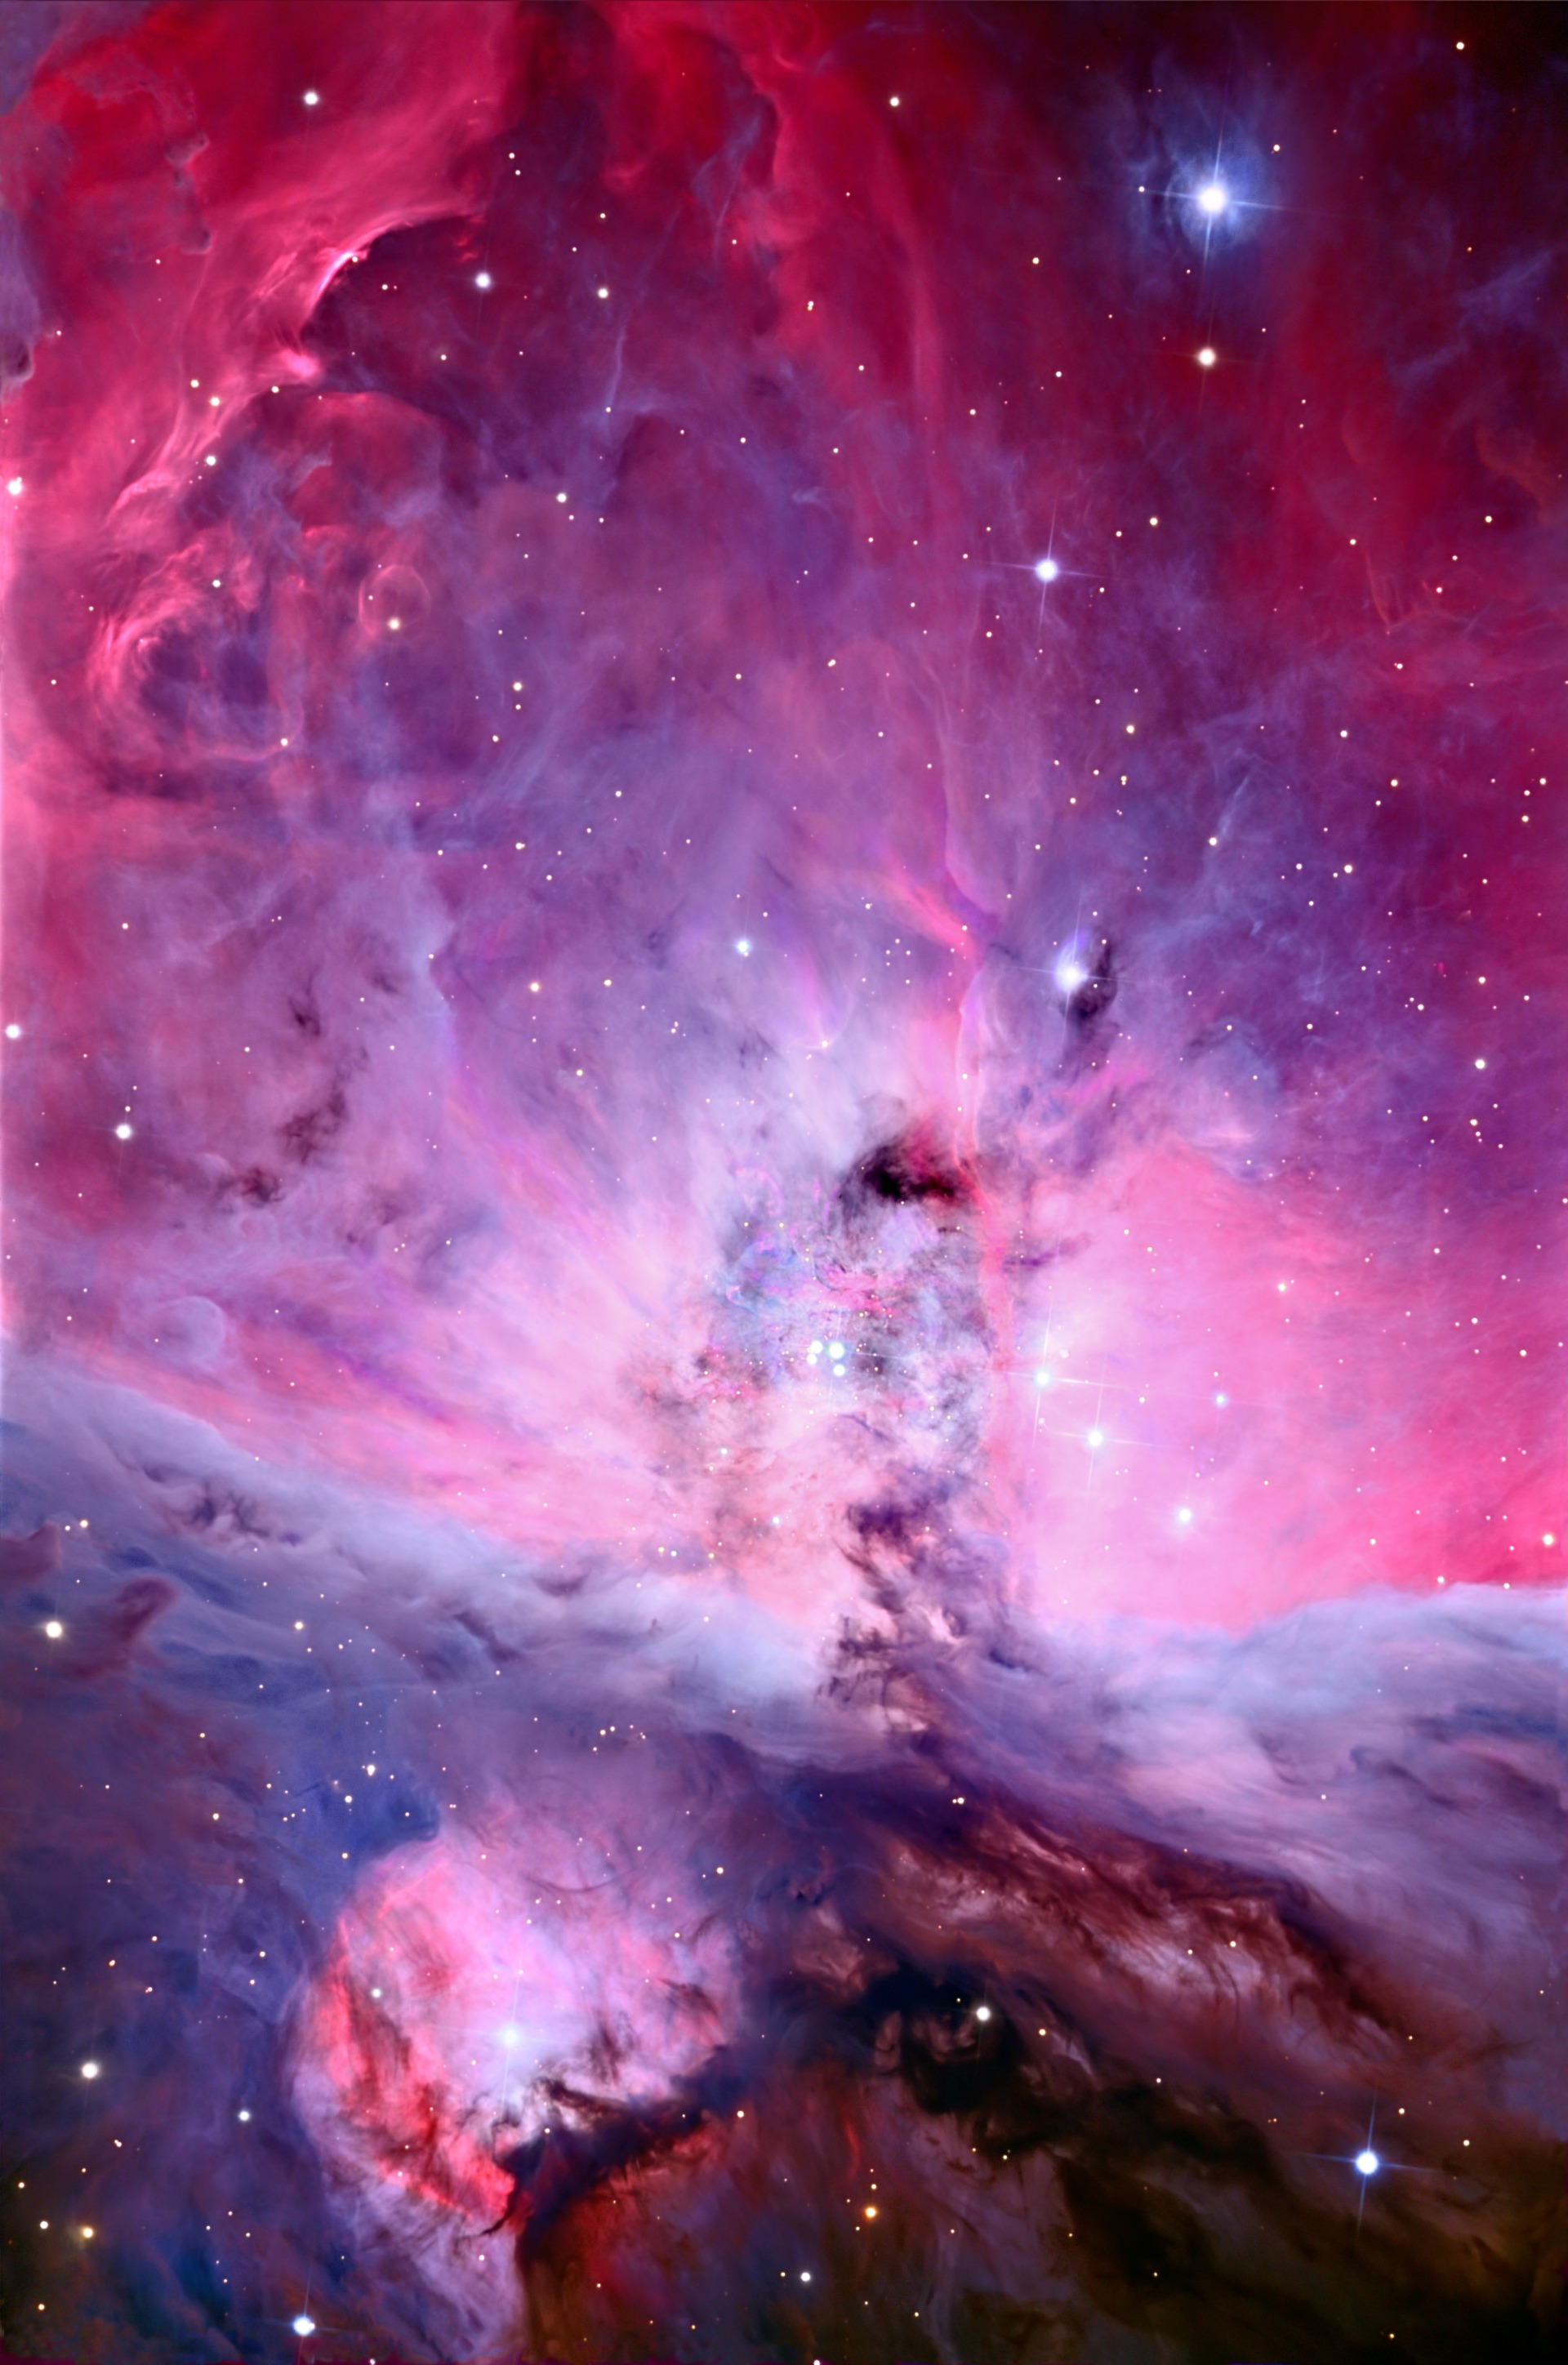 Messier 42 and Messier 43 (The Great Orion Nebula)